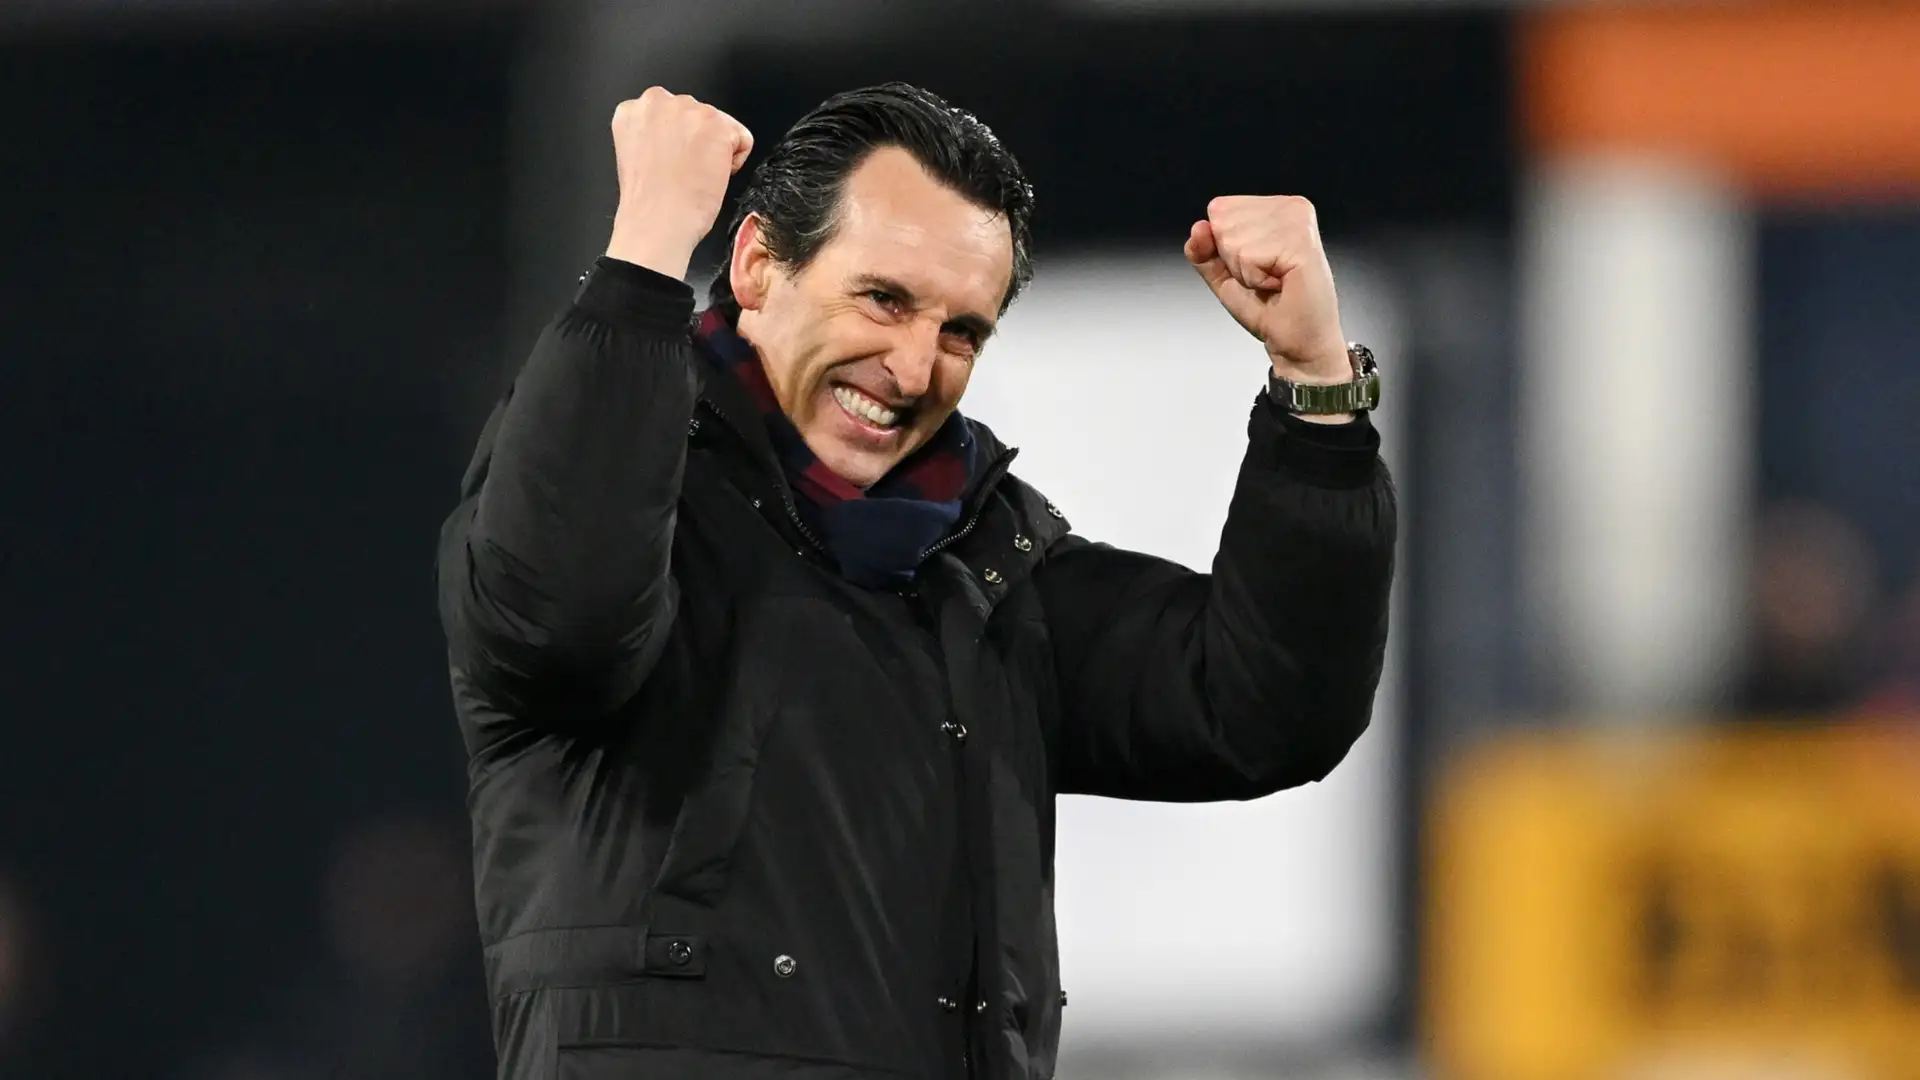 Unai Emery signs new long-term contract at Aston Villa after securing Champions League spot for first time in Premier League team's history